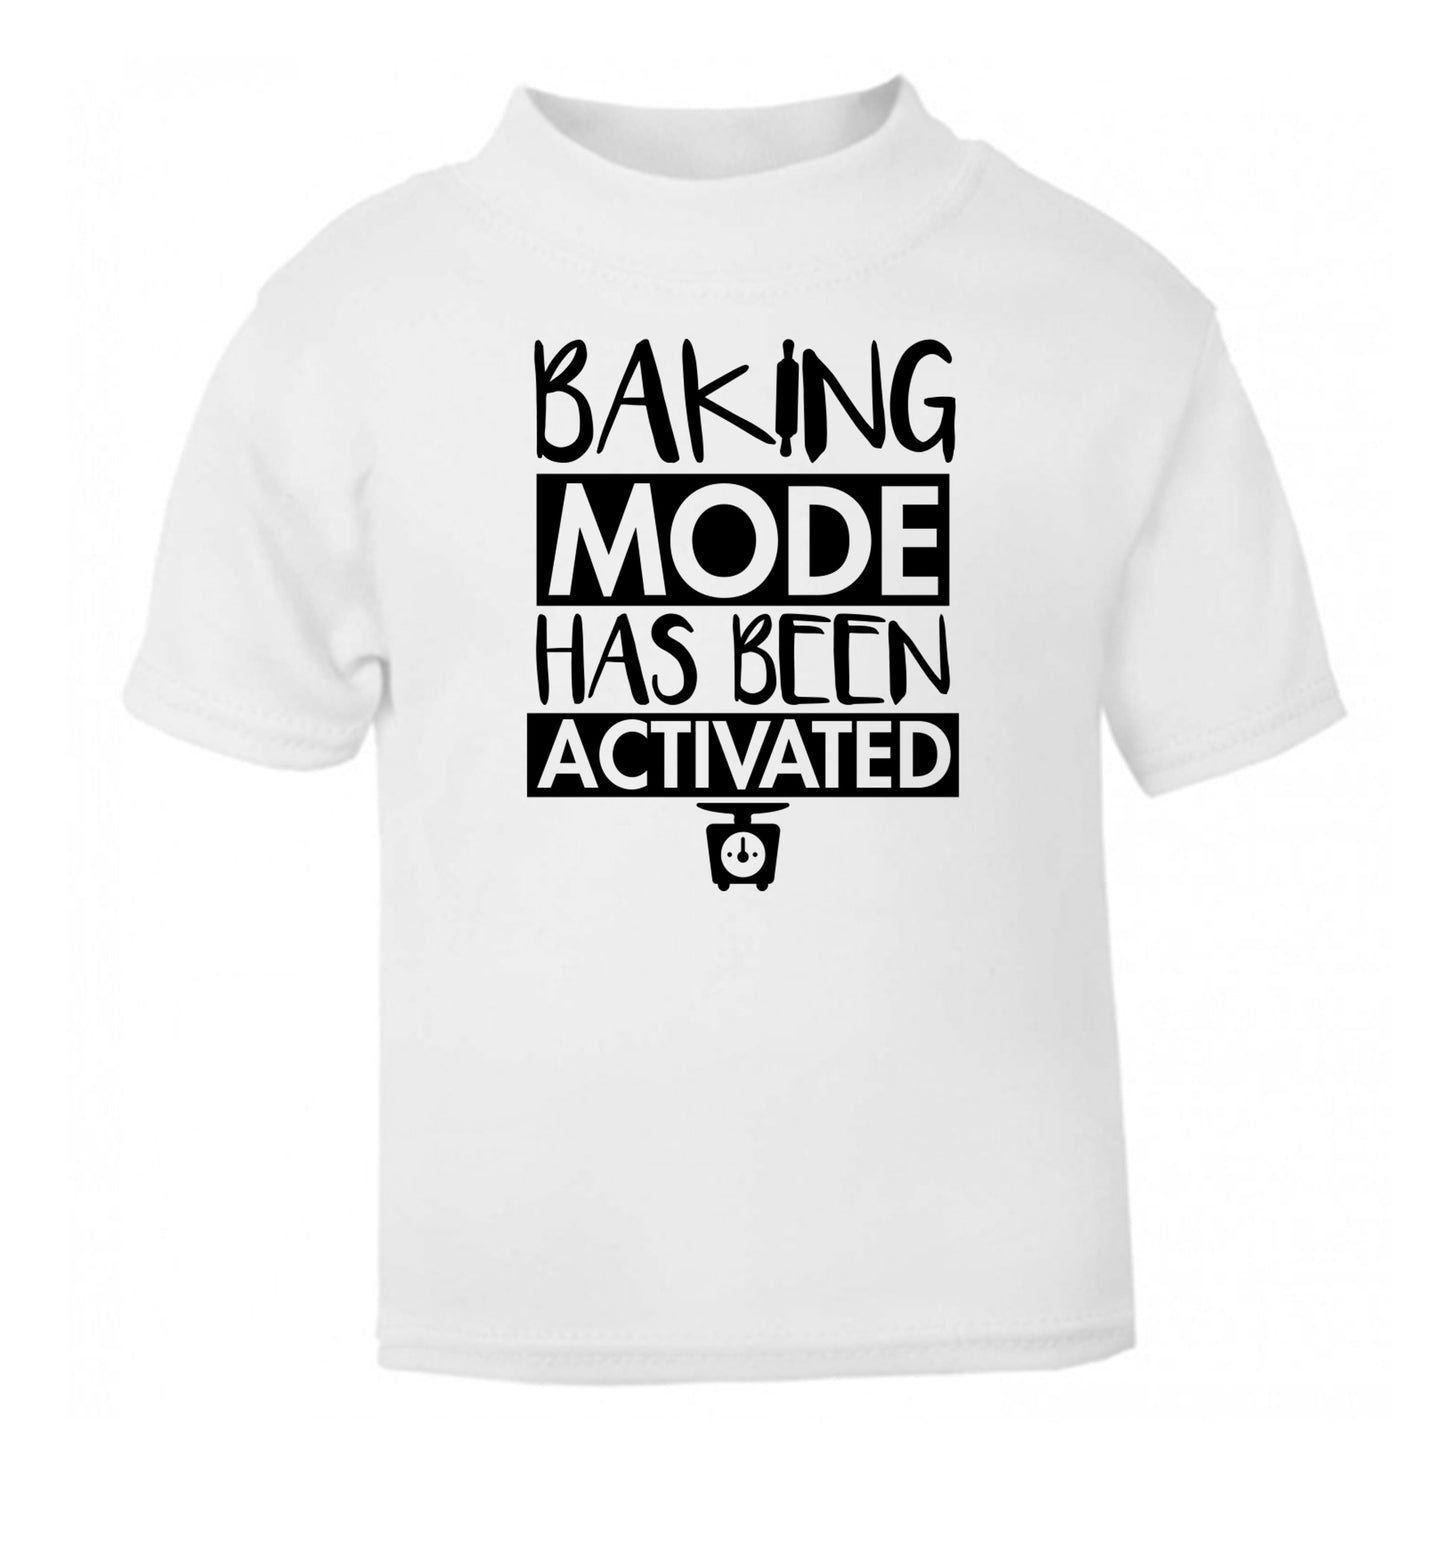 Baking mode has been activated white Baby Toddler Tshirt 2 Years